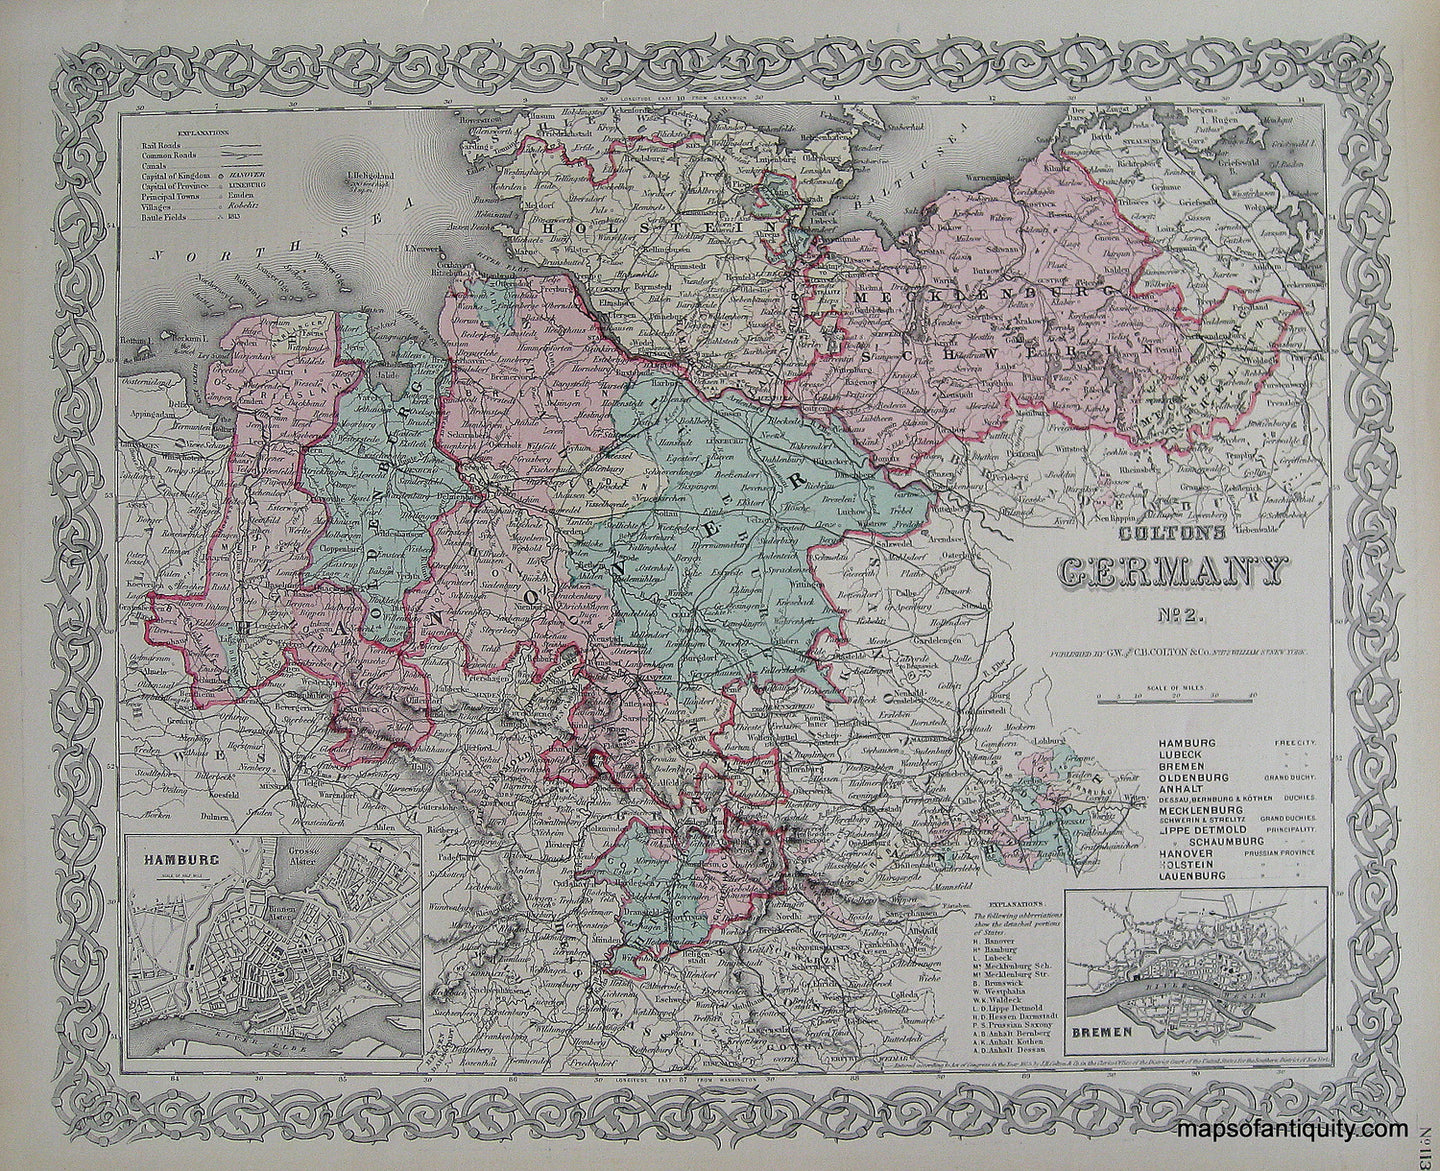 Antique-Hand-Colored-Map-Colton's-Germany-No.-2.-Europe-Germany-1873-Colton-Maps-Of-Antiquity